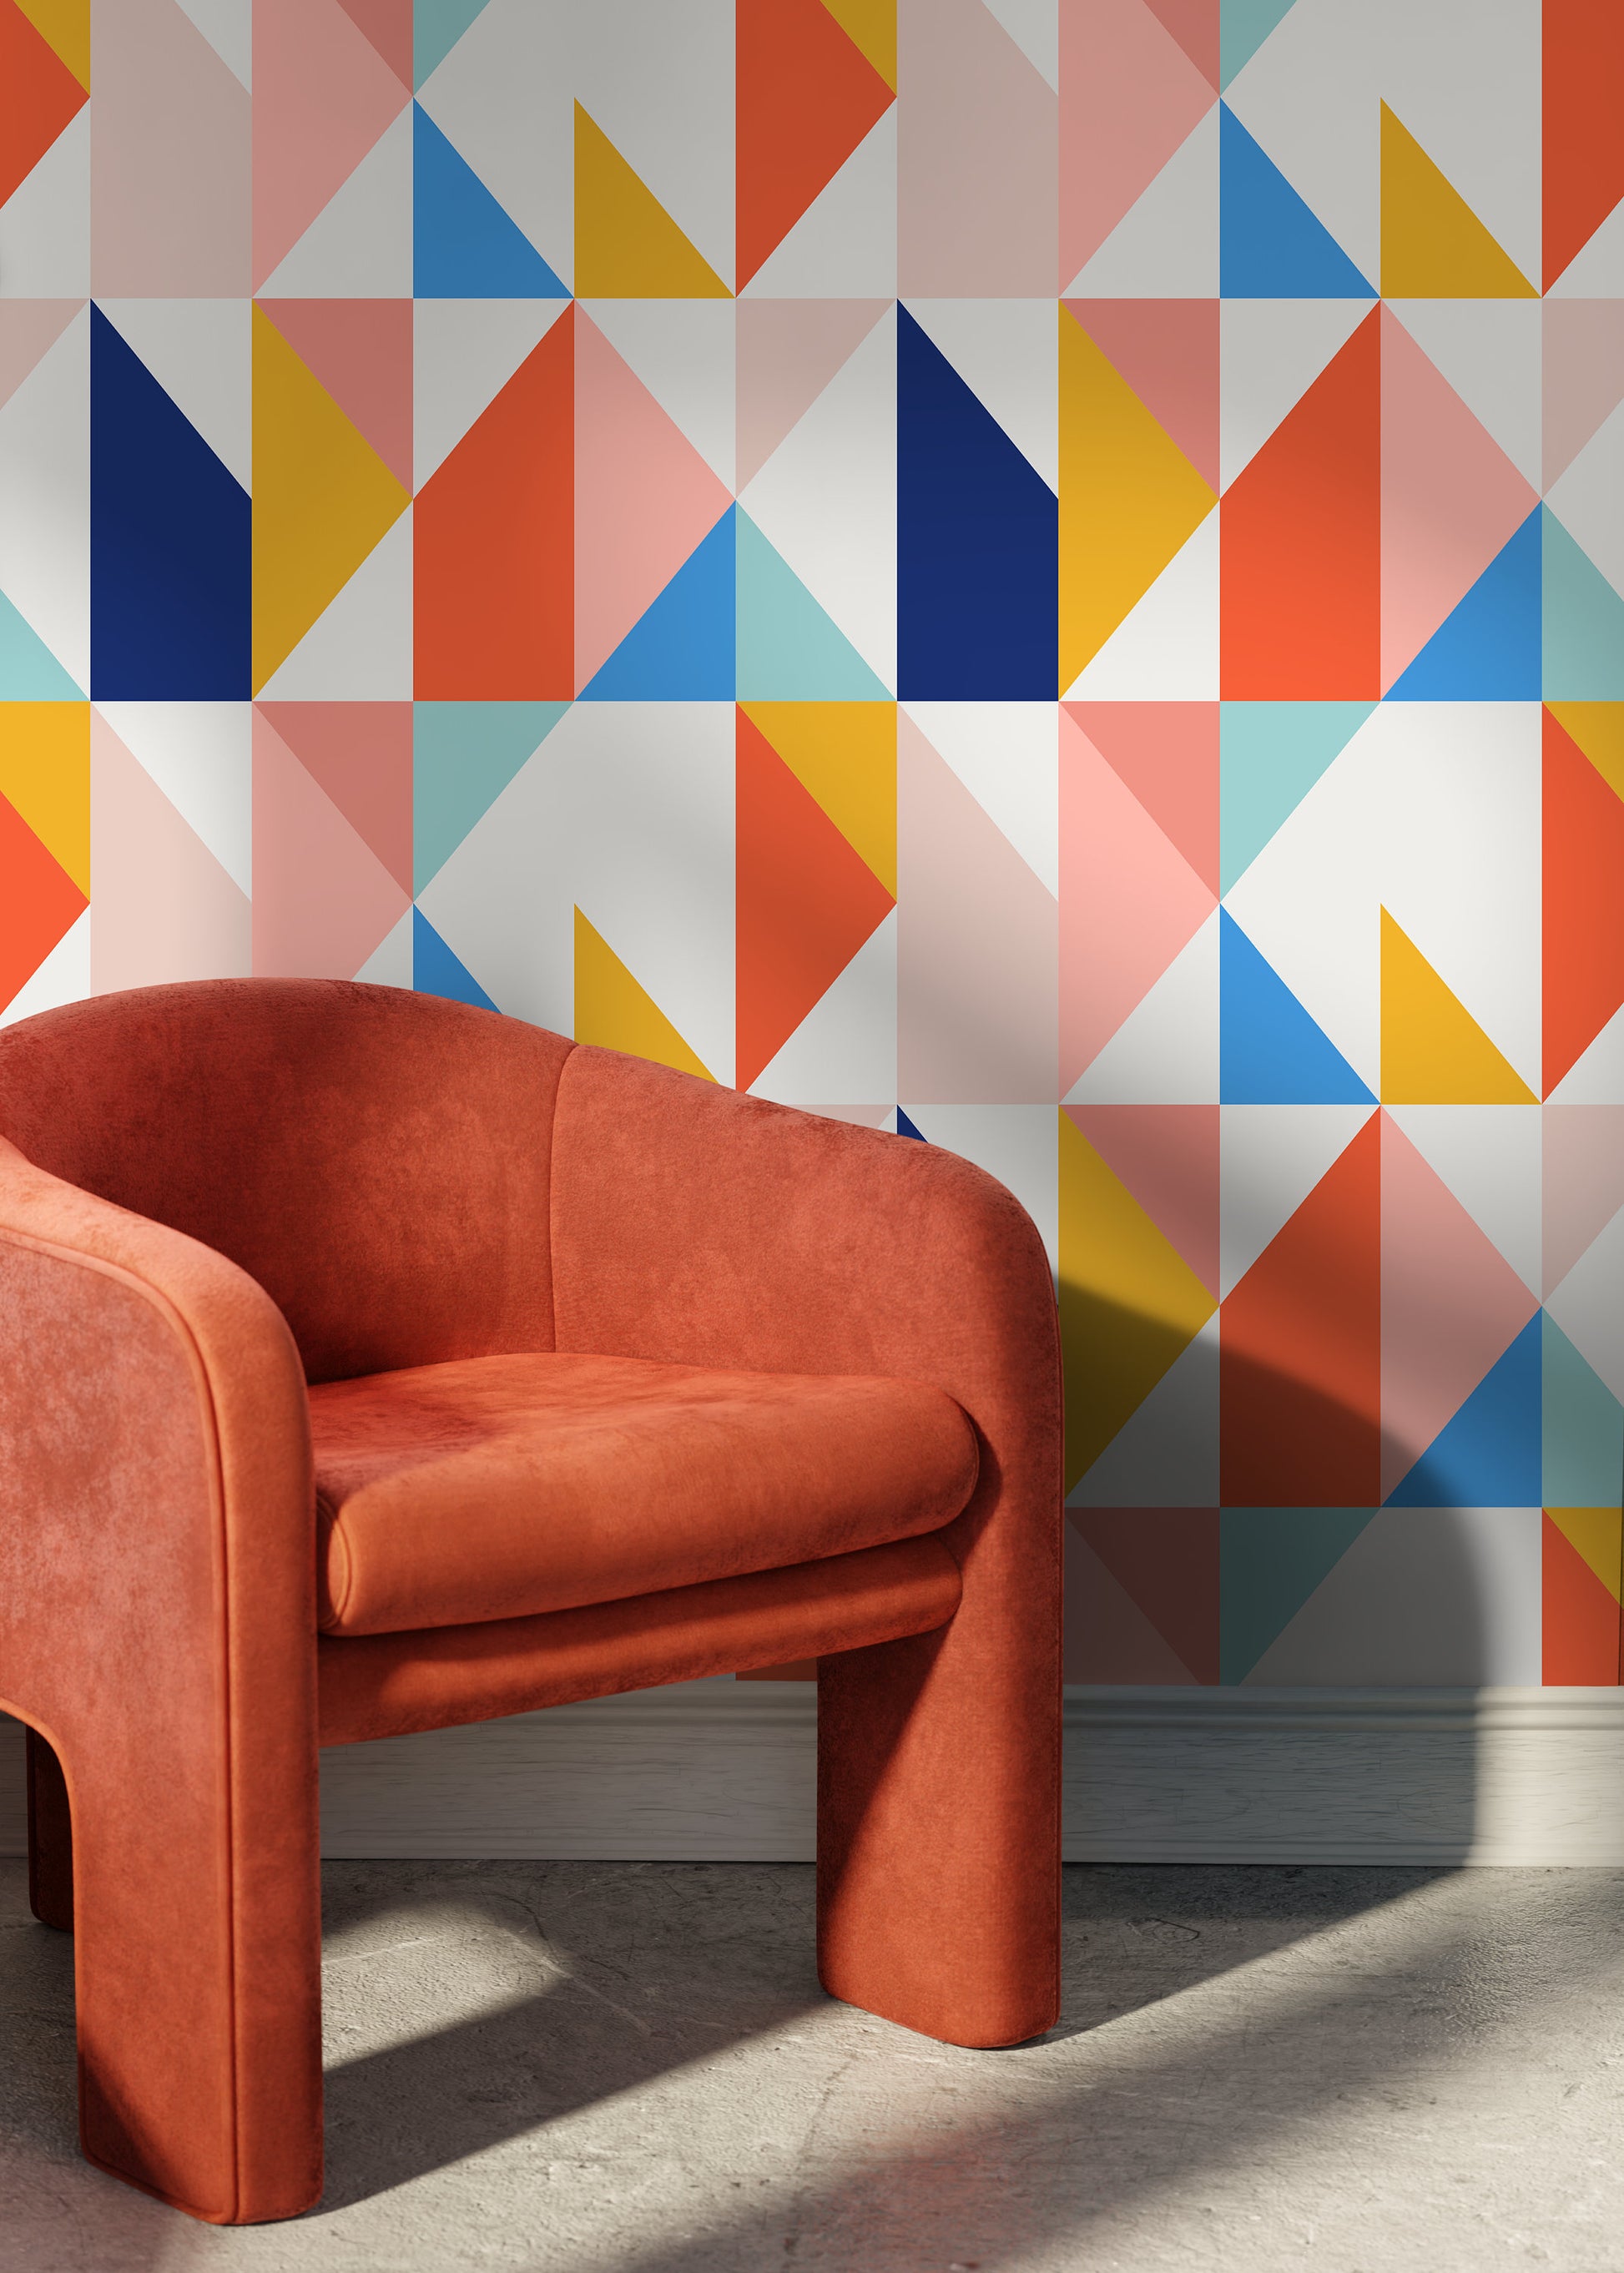 Colorful Geometric Removable Wallpaper Home Decor Wall Art Room Decor / Colorful Geometric Wallpaper - B846